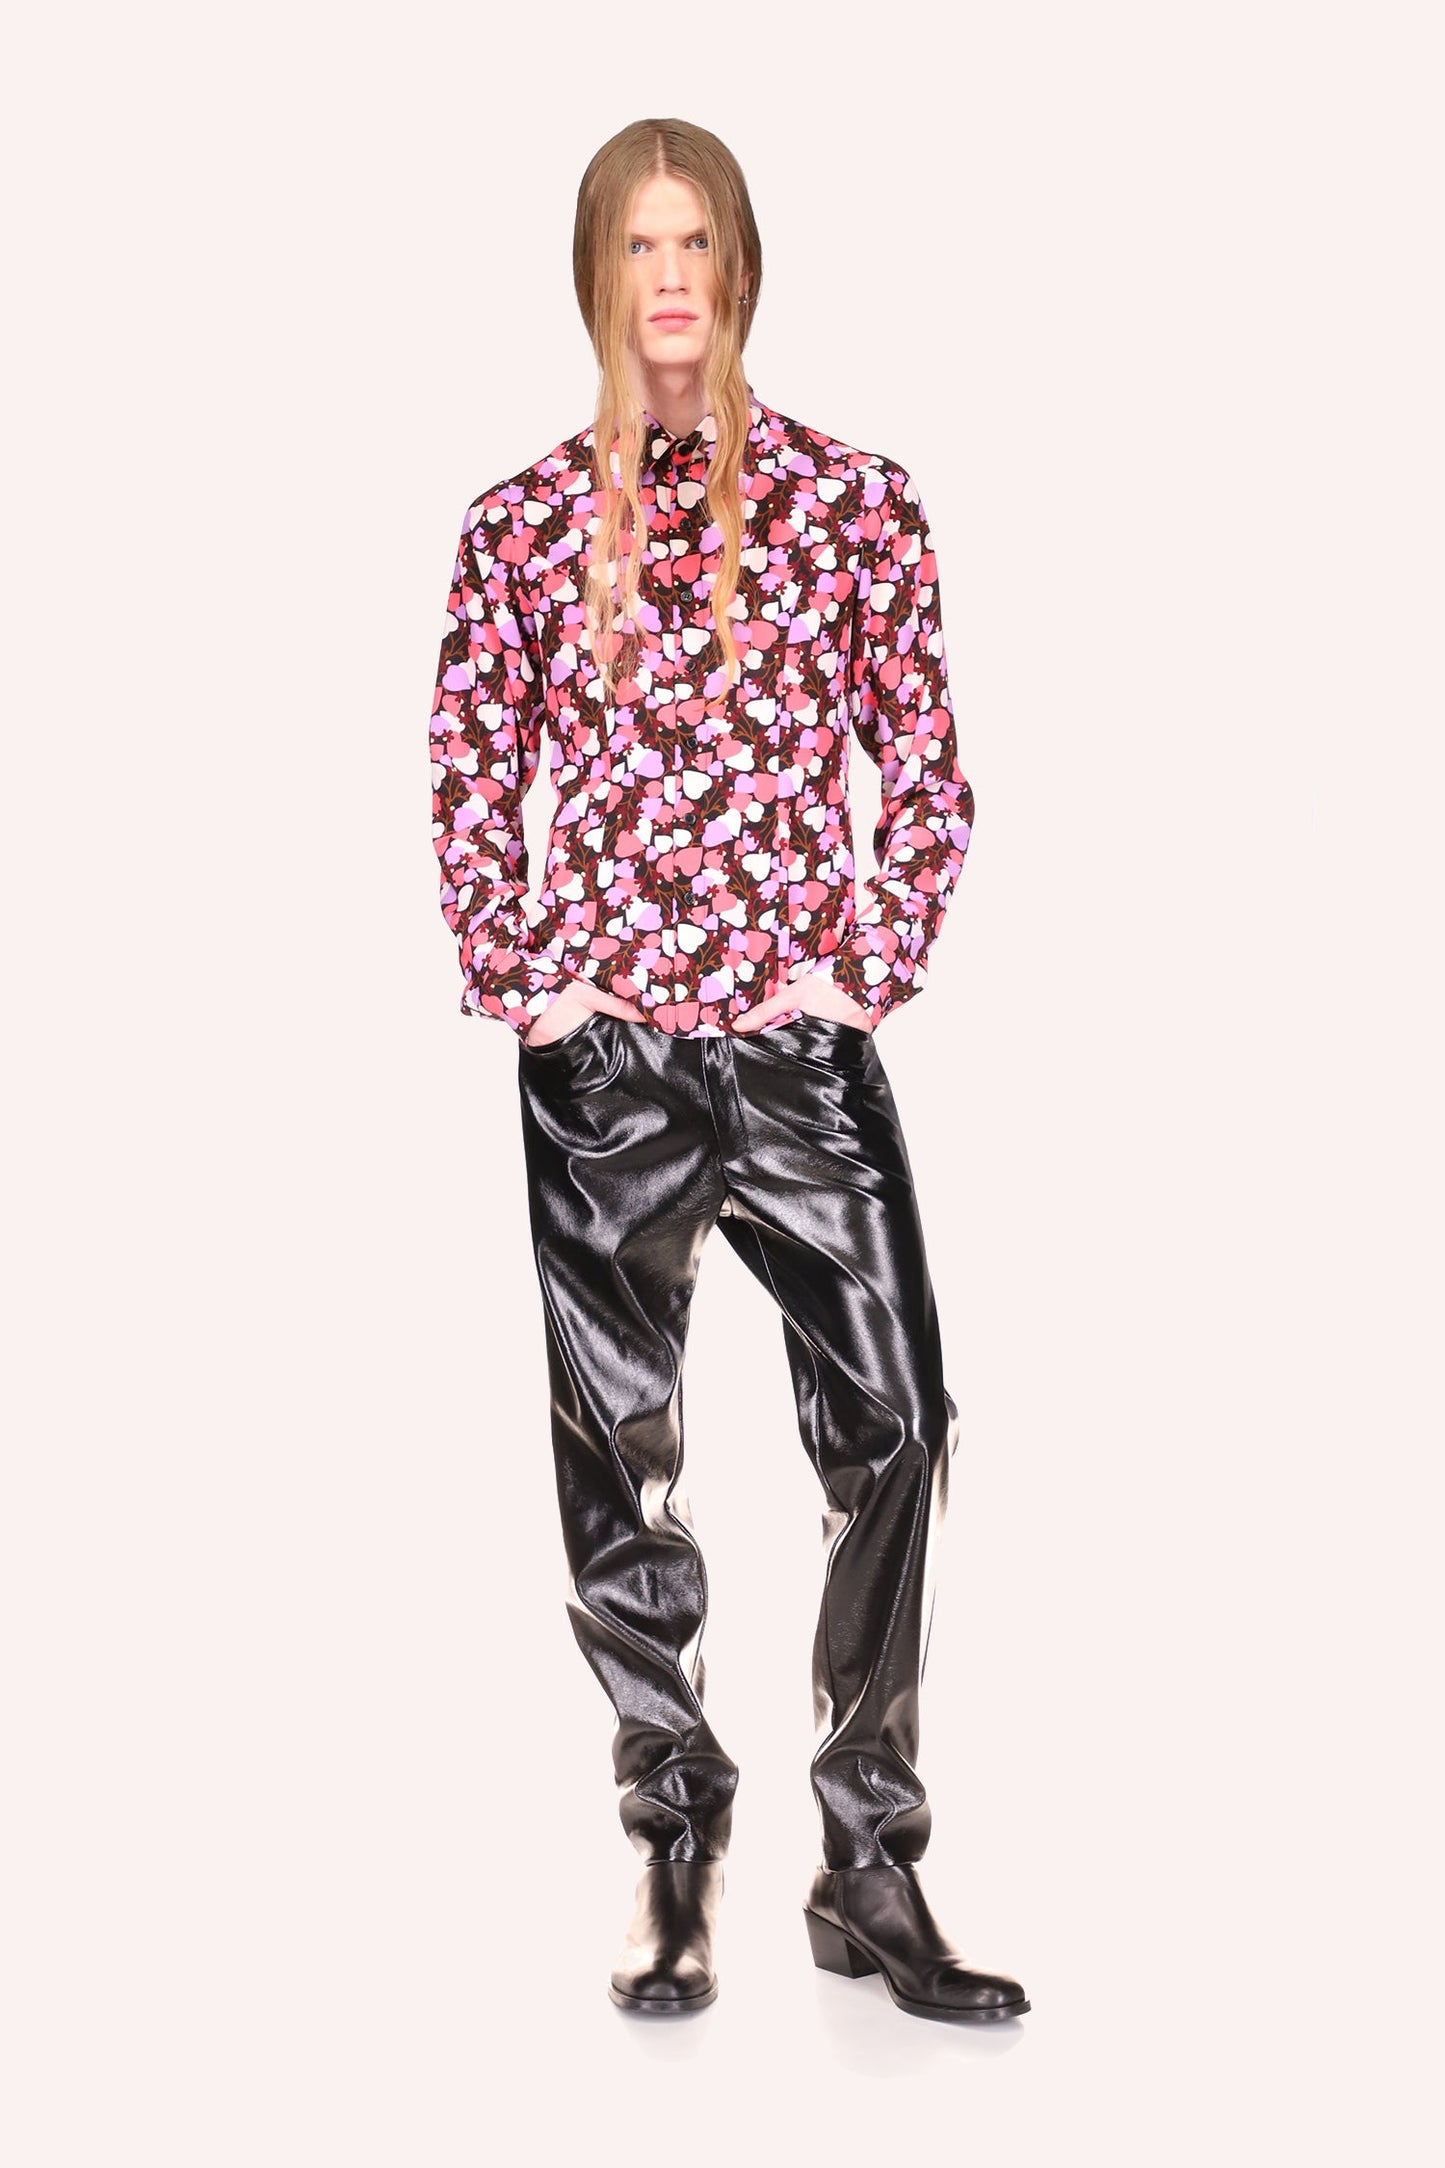  Blooming Hearts Top, long sleeves buttoned shirt, perfect with Anna Sui Floral Jacquard Pants Black